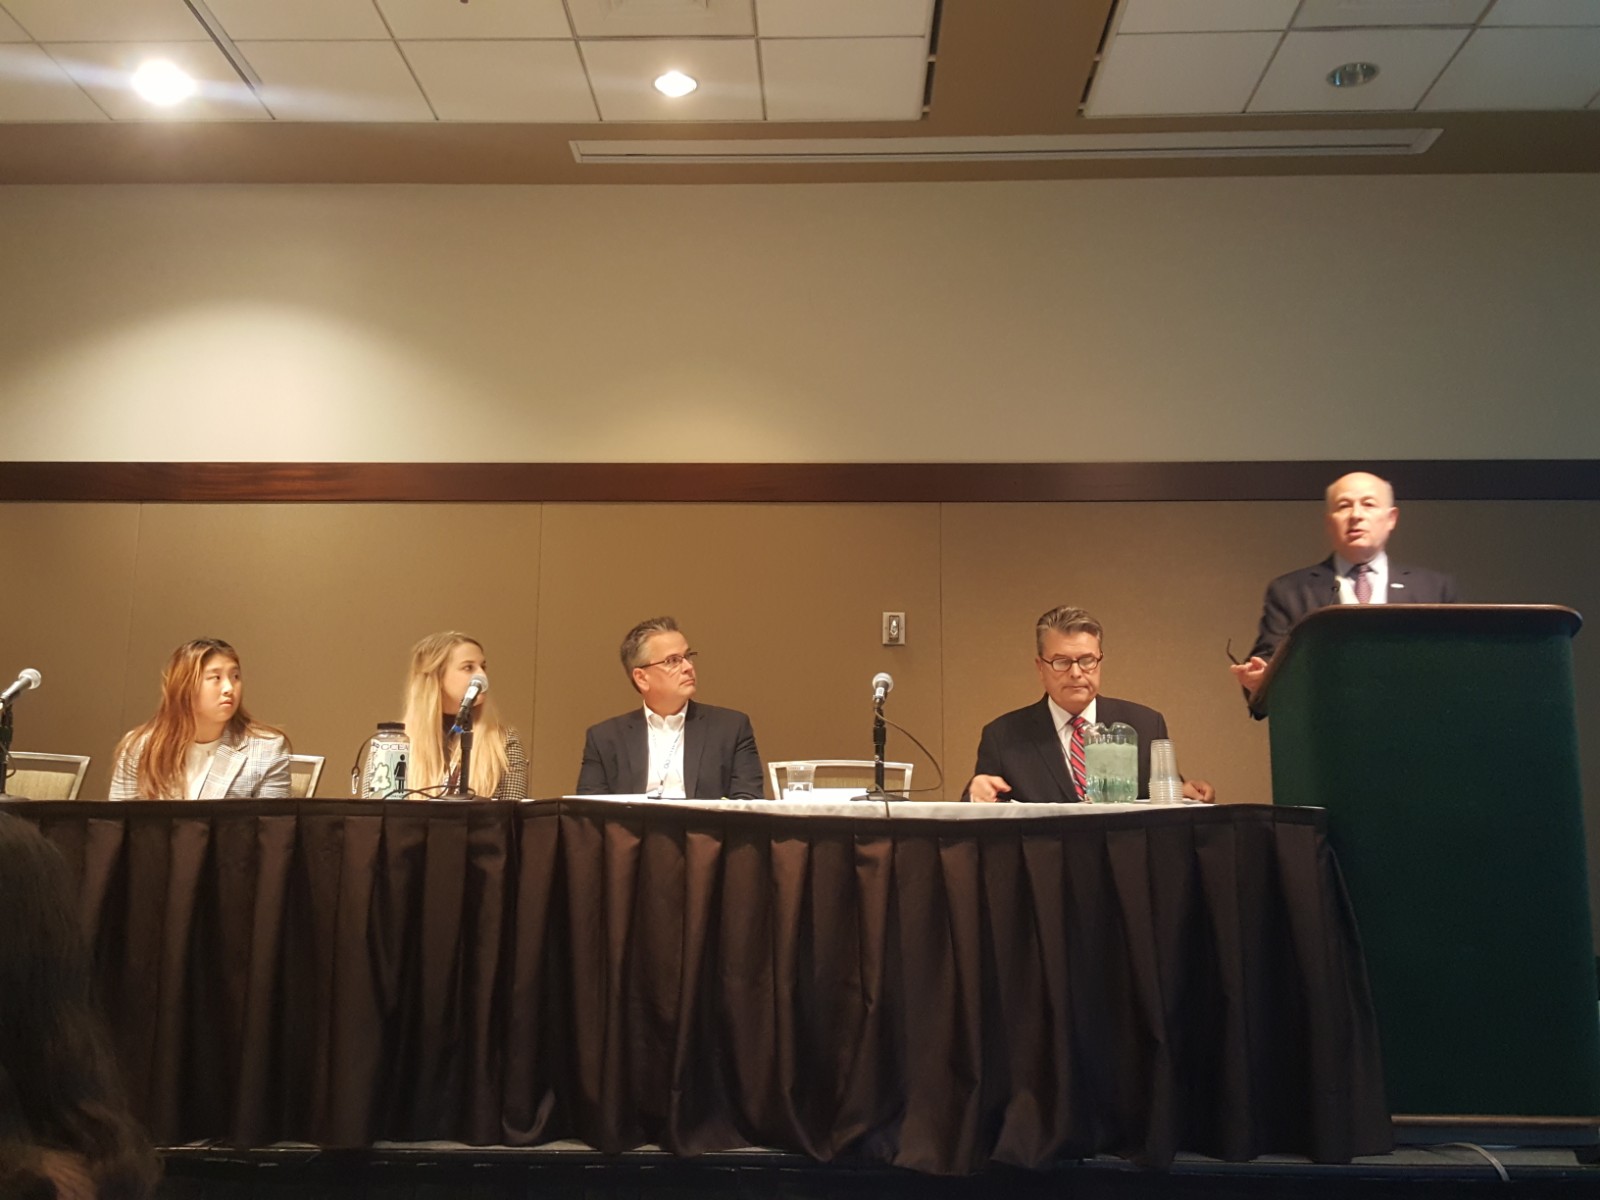 The panel on Decade of Ocean Sciences at OCEANS Seattle 2019